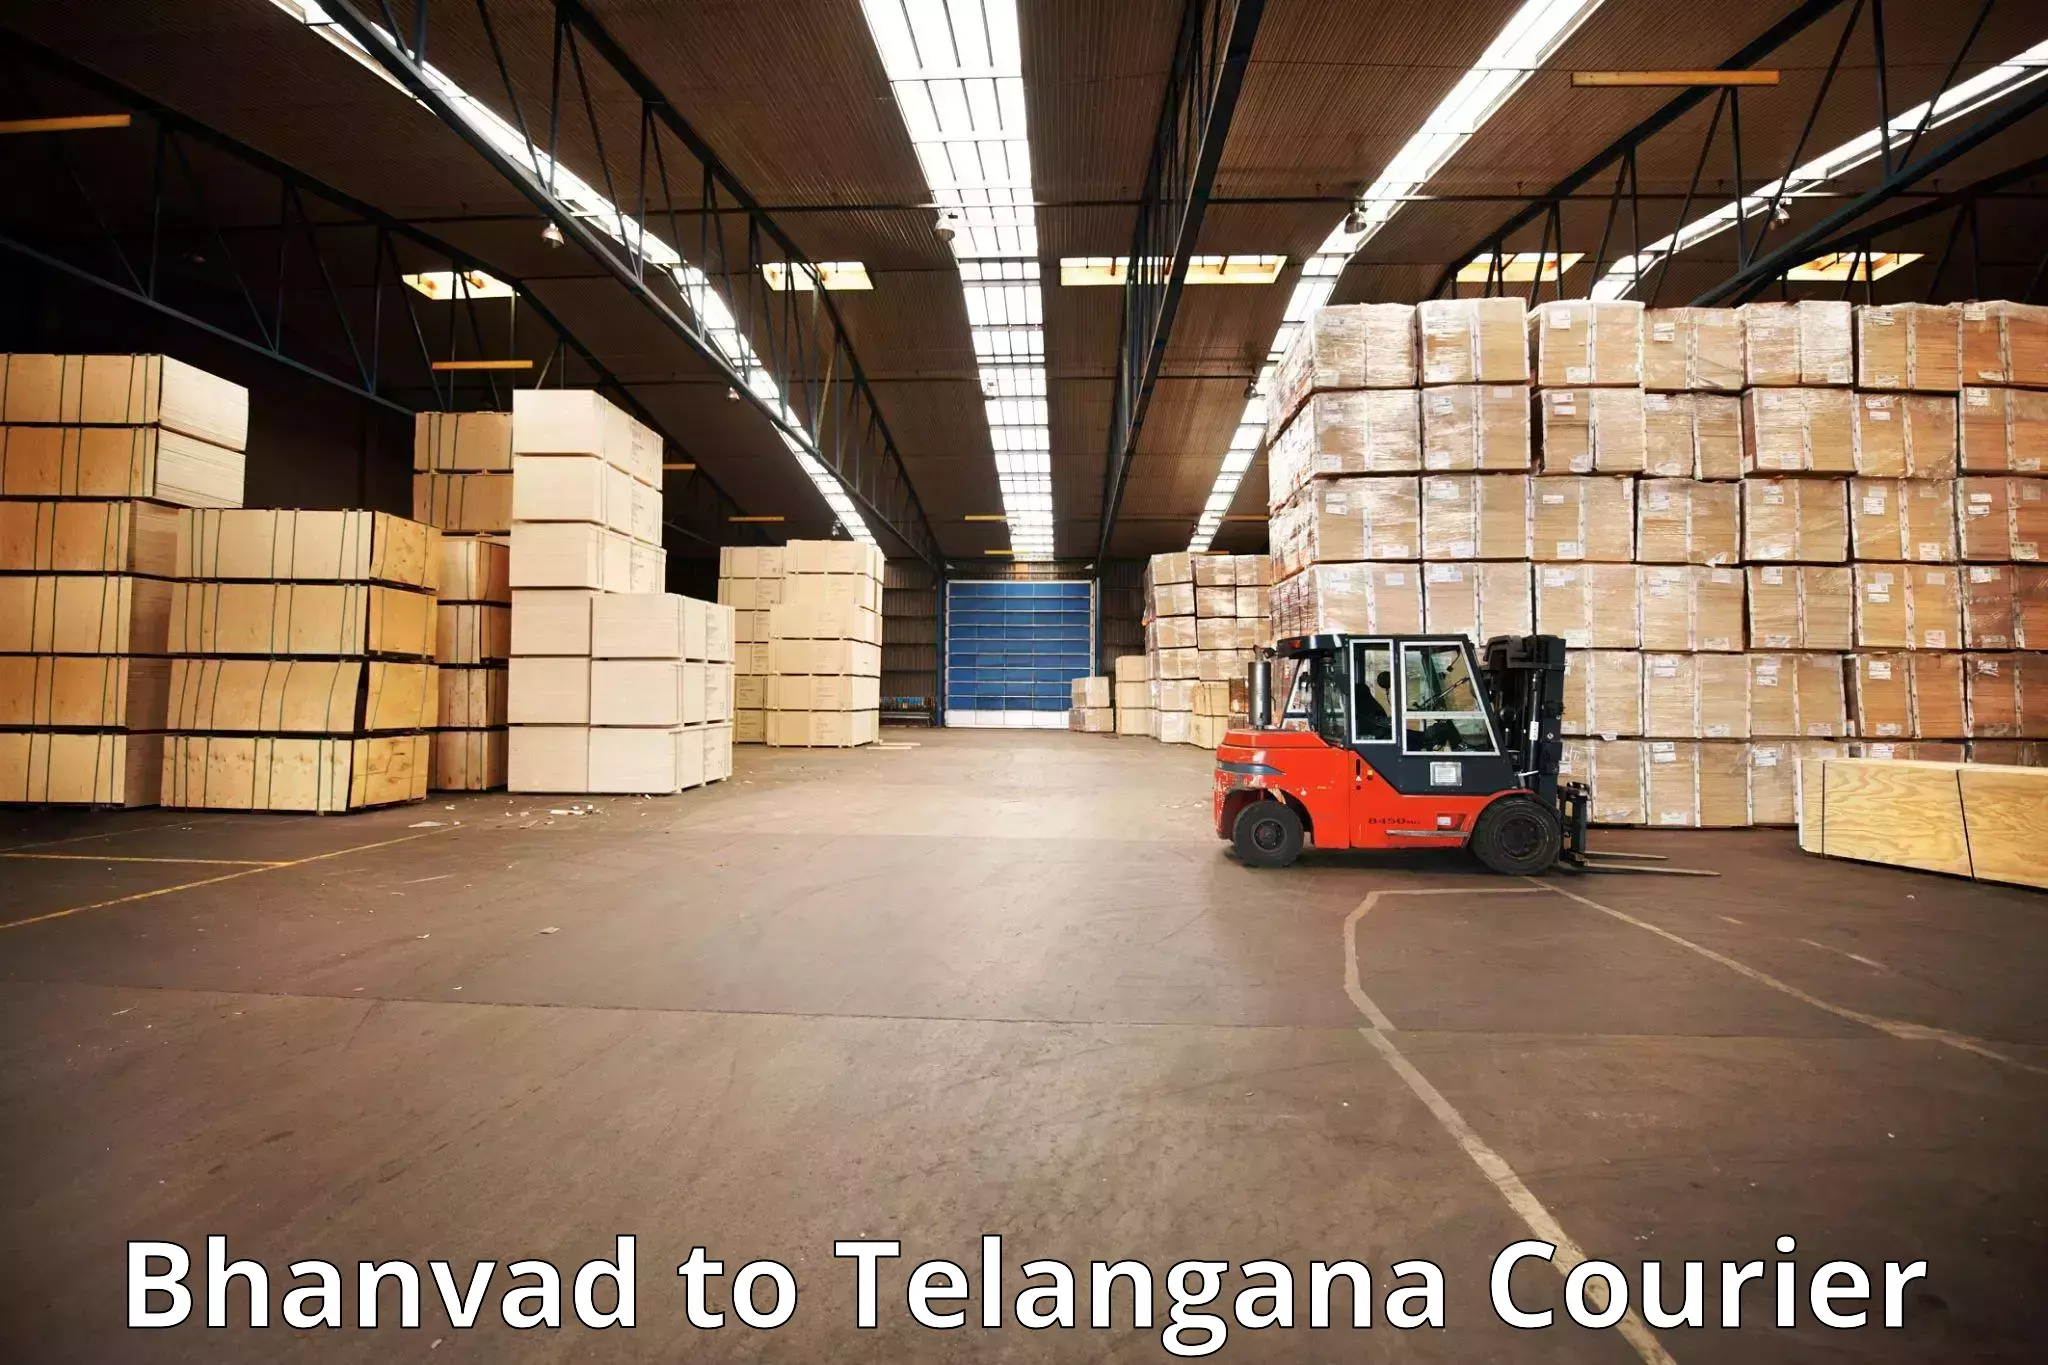 Efficient luggage delivery in Bhanvad to Hyderabad